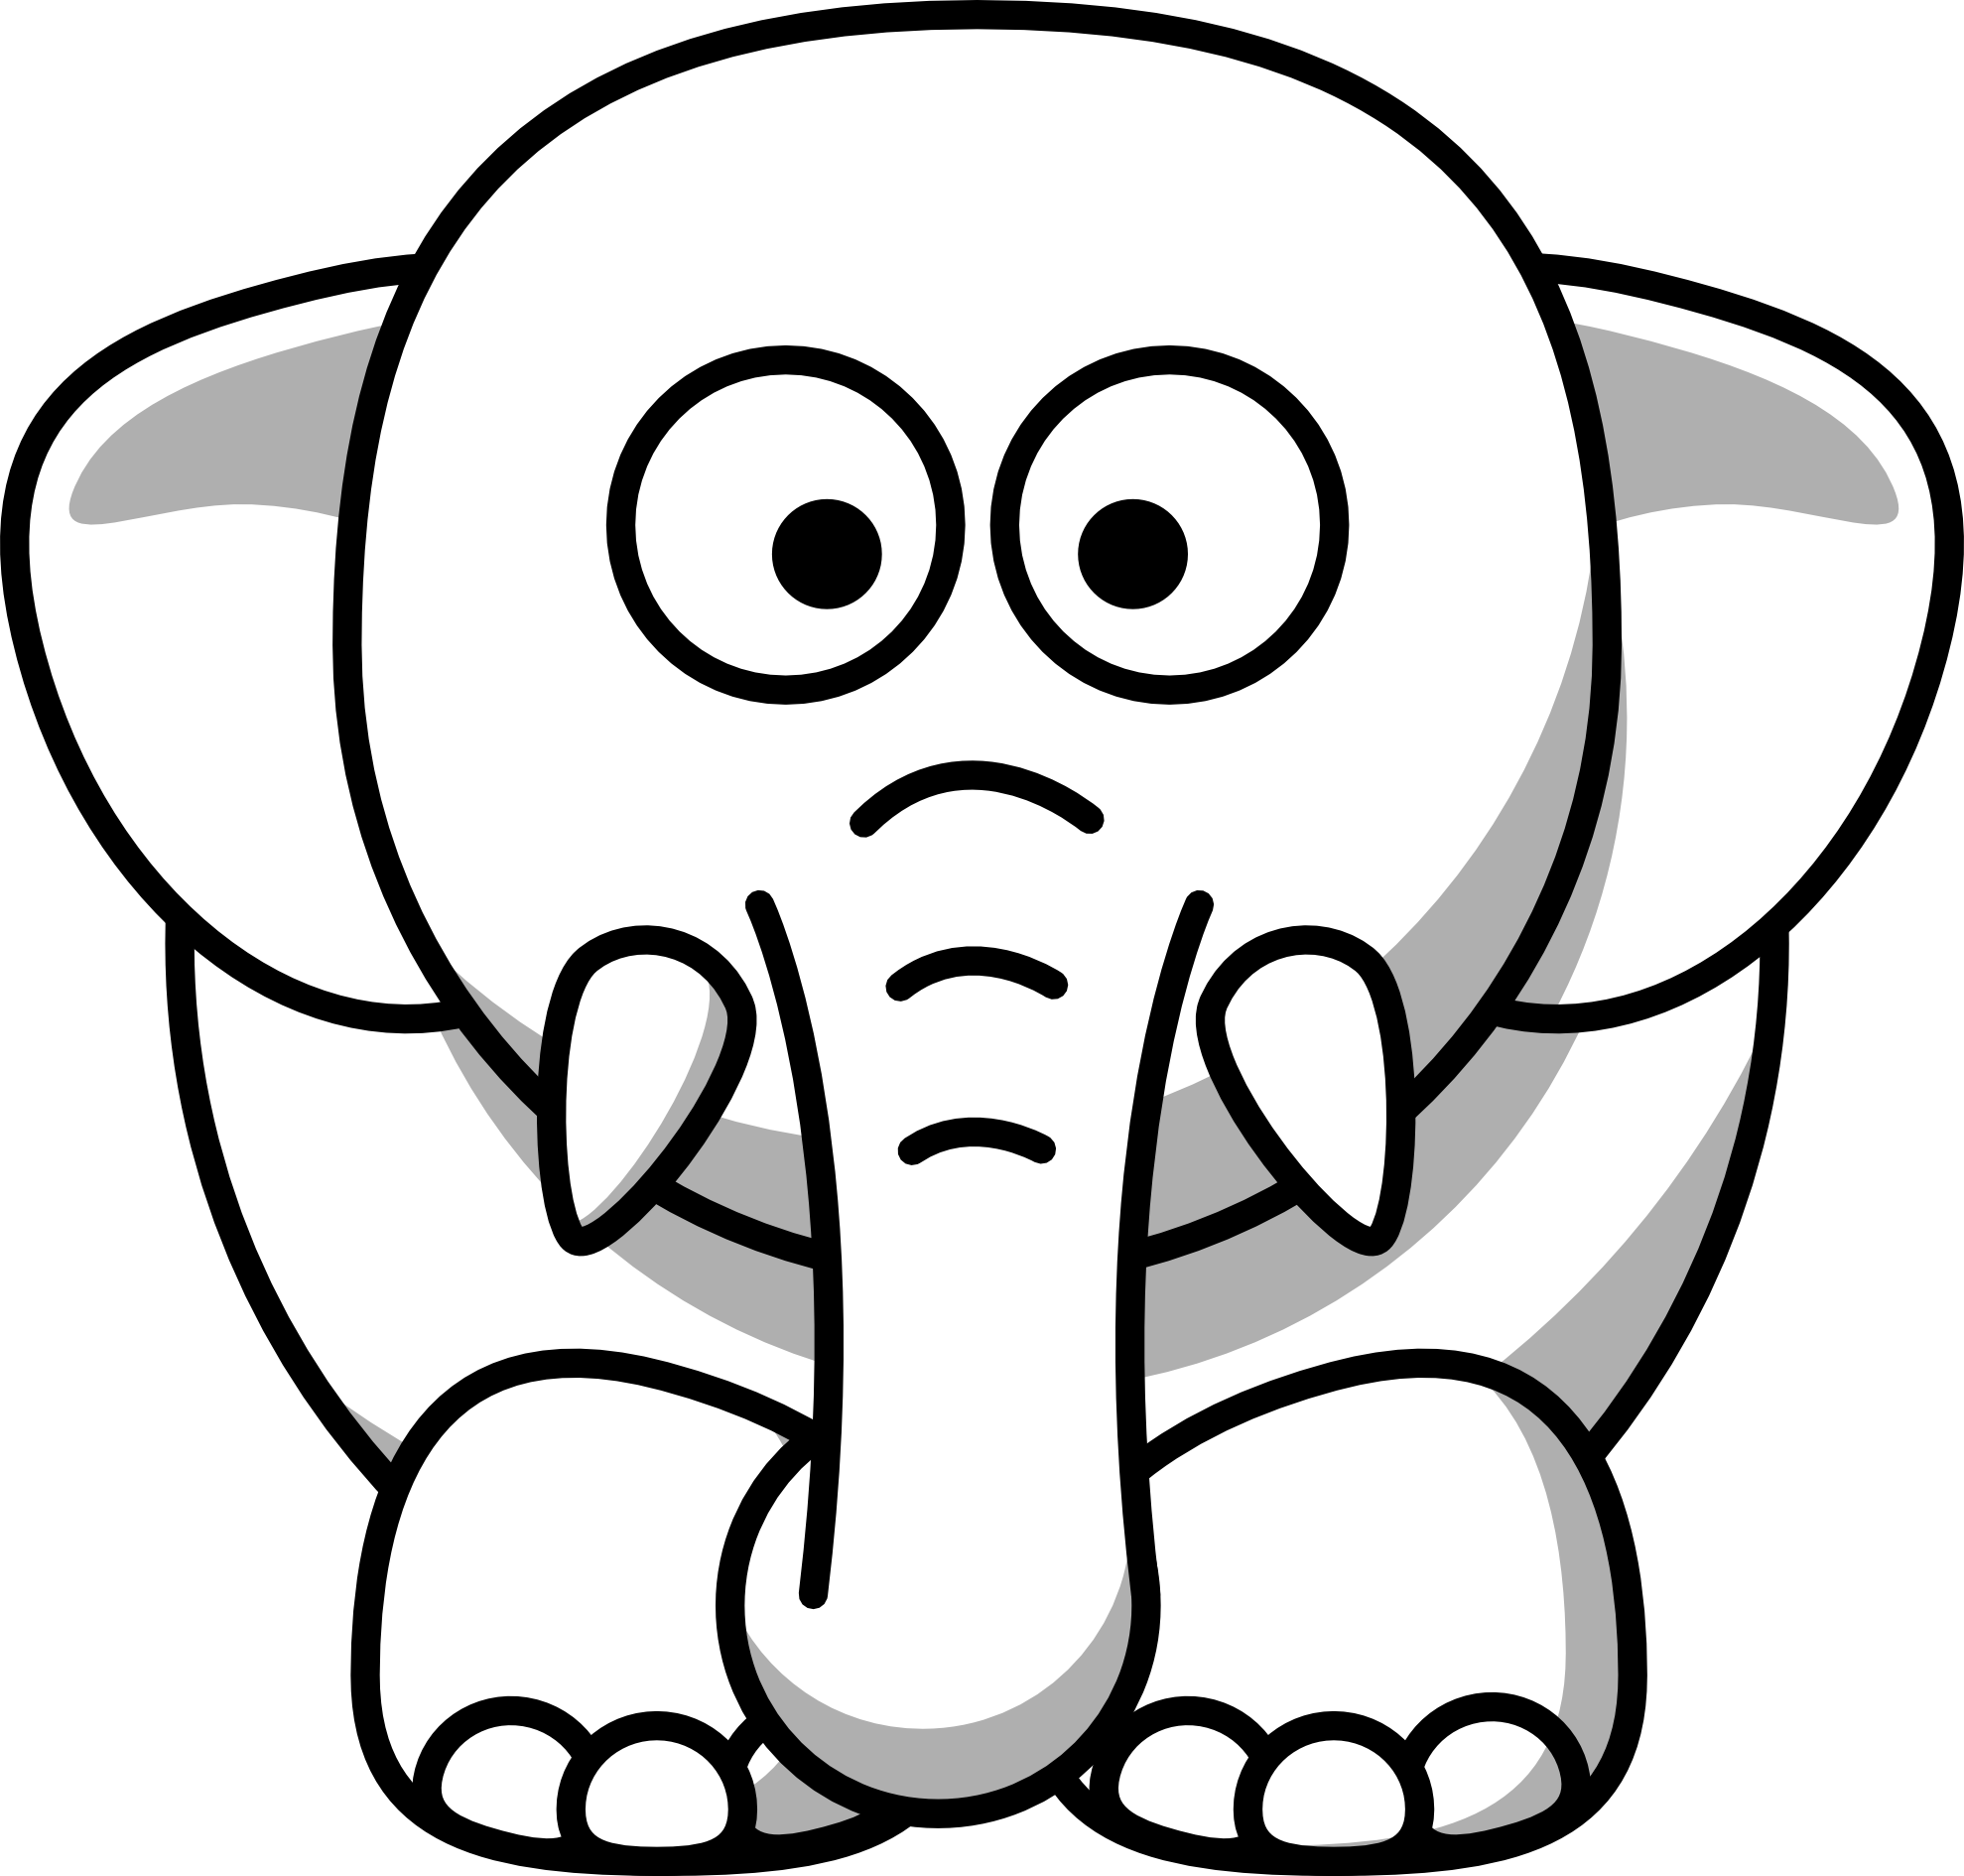 Baby Elephant Clipart Black And White | Clipart Panda - Free ...